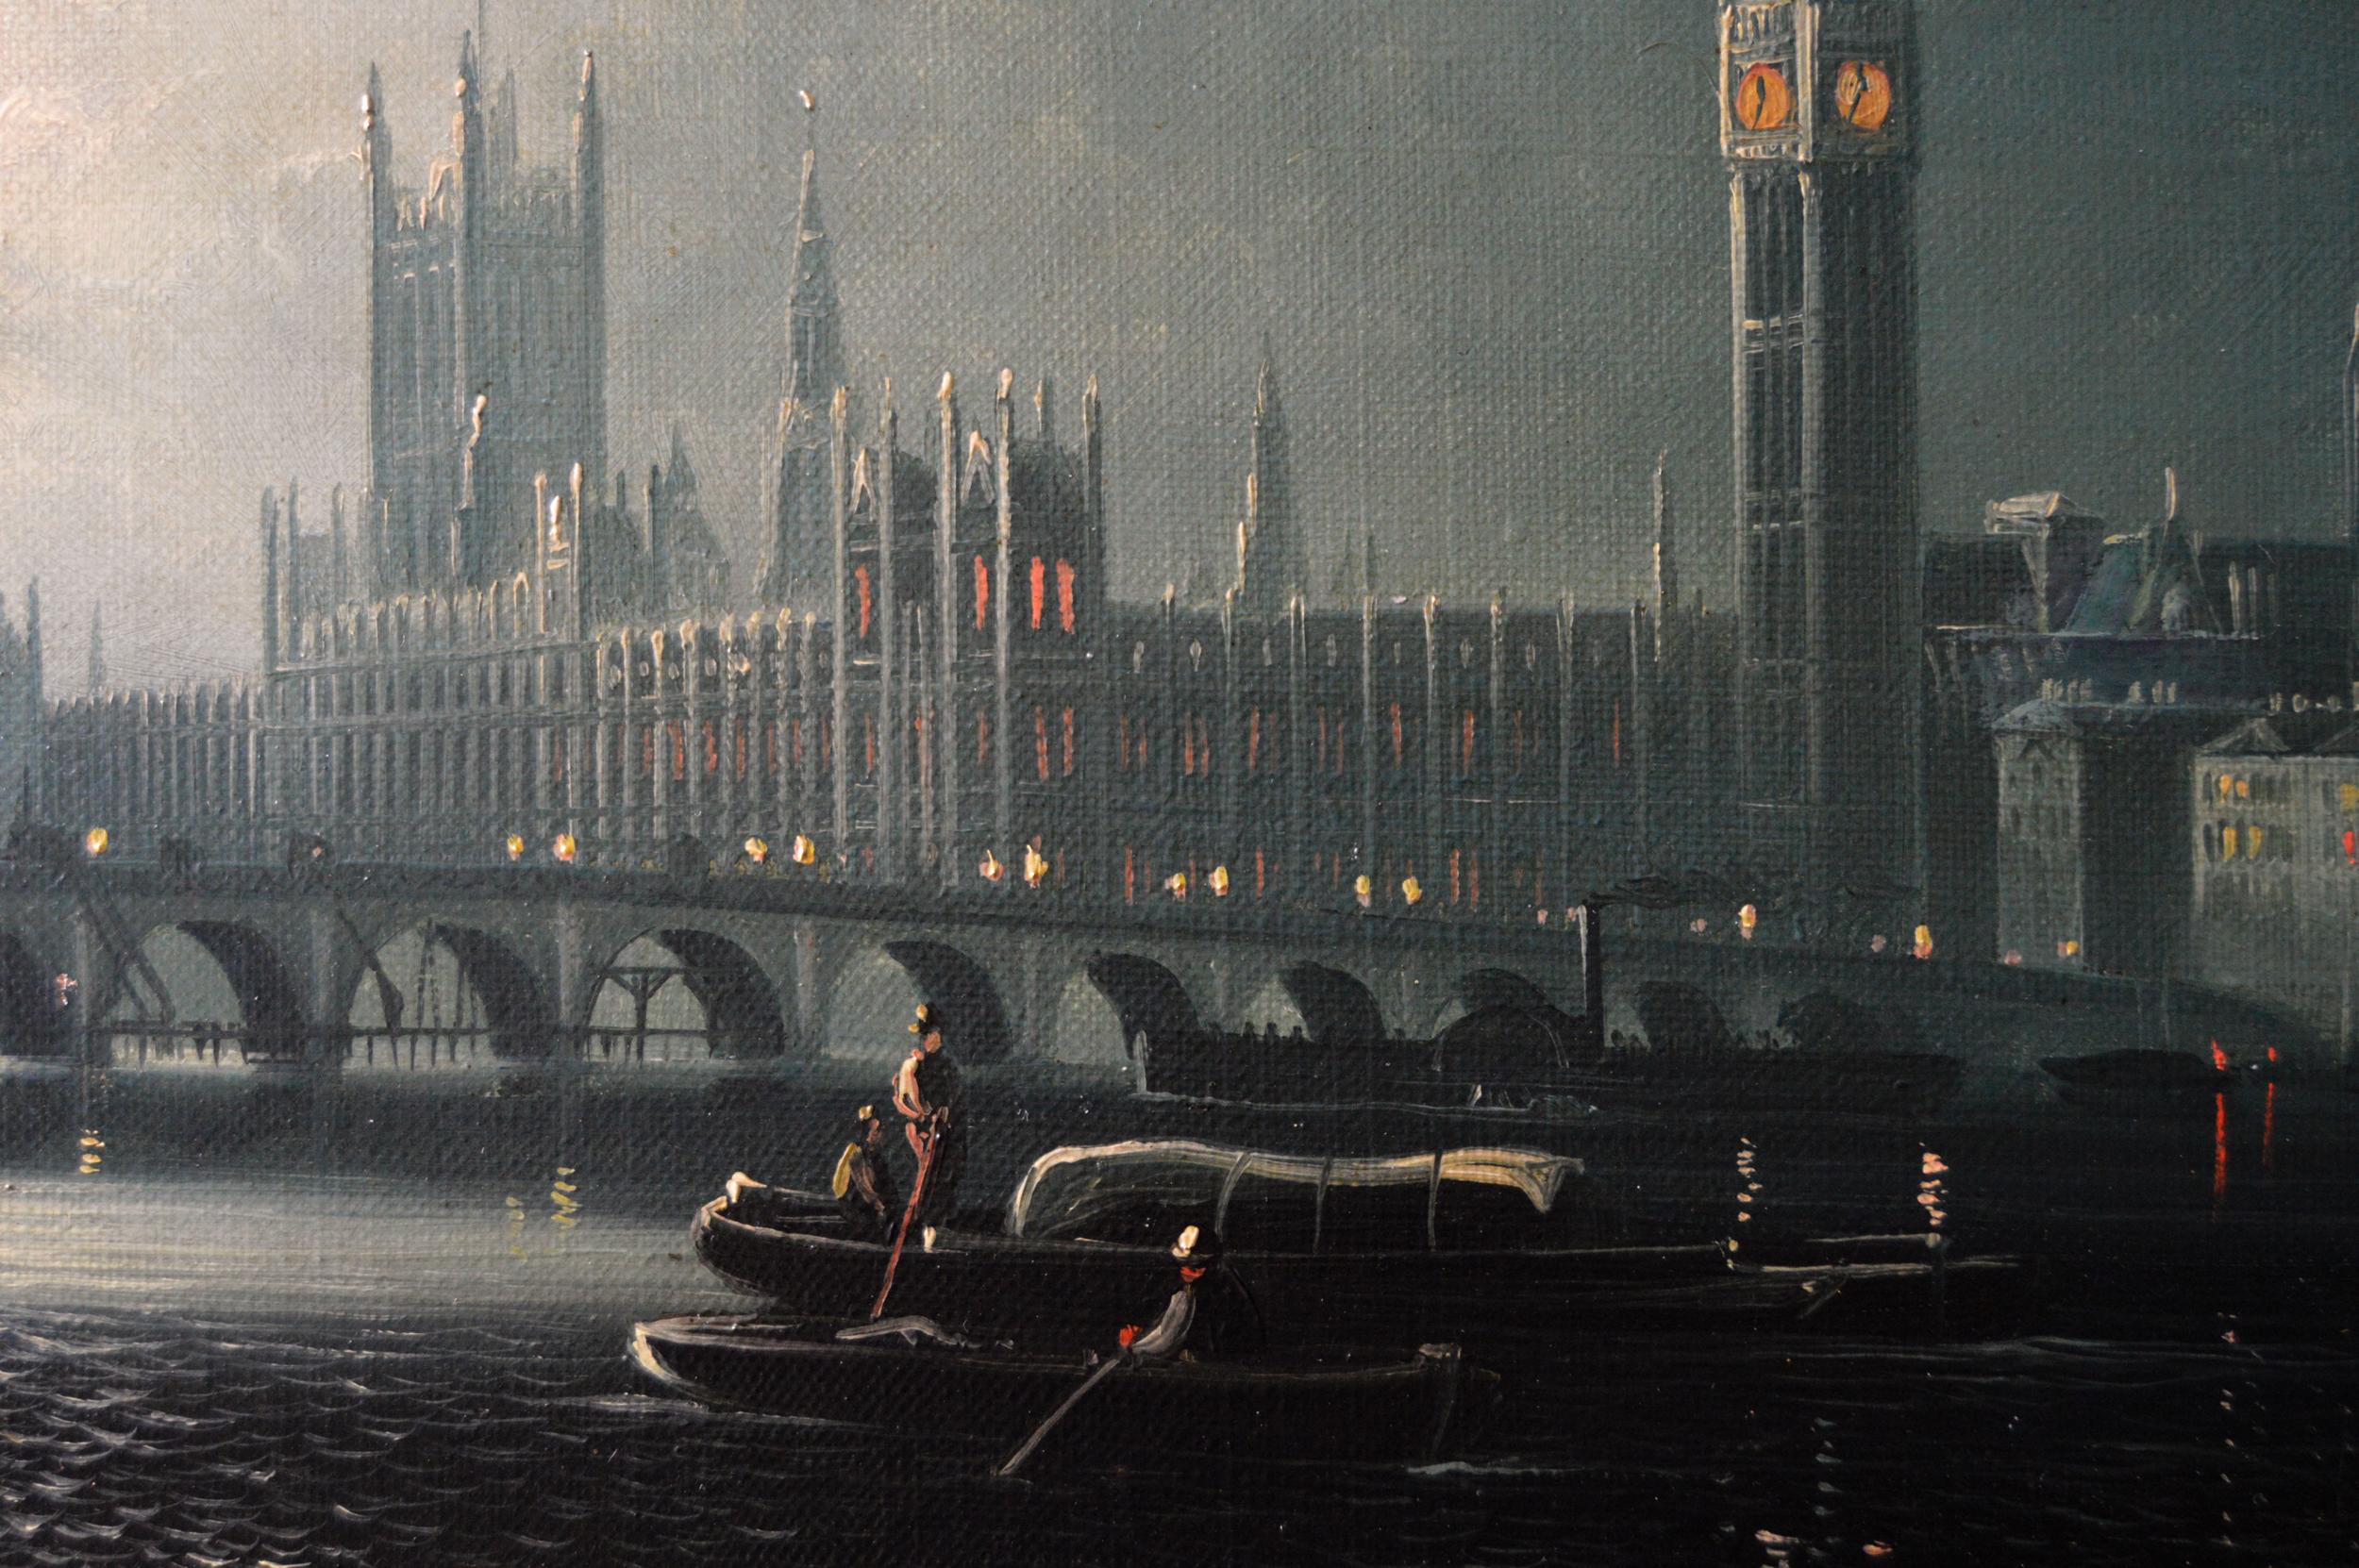 Ansdell Smythe
British, (19th century)
Houses of Parliament & St Paul’s Cathedral
Oil on canvas, pair, both signed 
Image size: 9.5 inches x 17.5 inches 
Size including frame: 15 inches x 23 inches

Smythe specialised in moonlit scenes of London’s